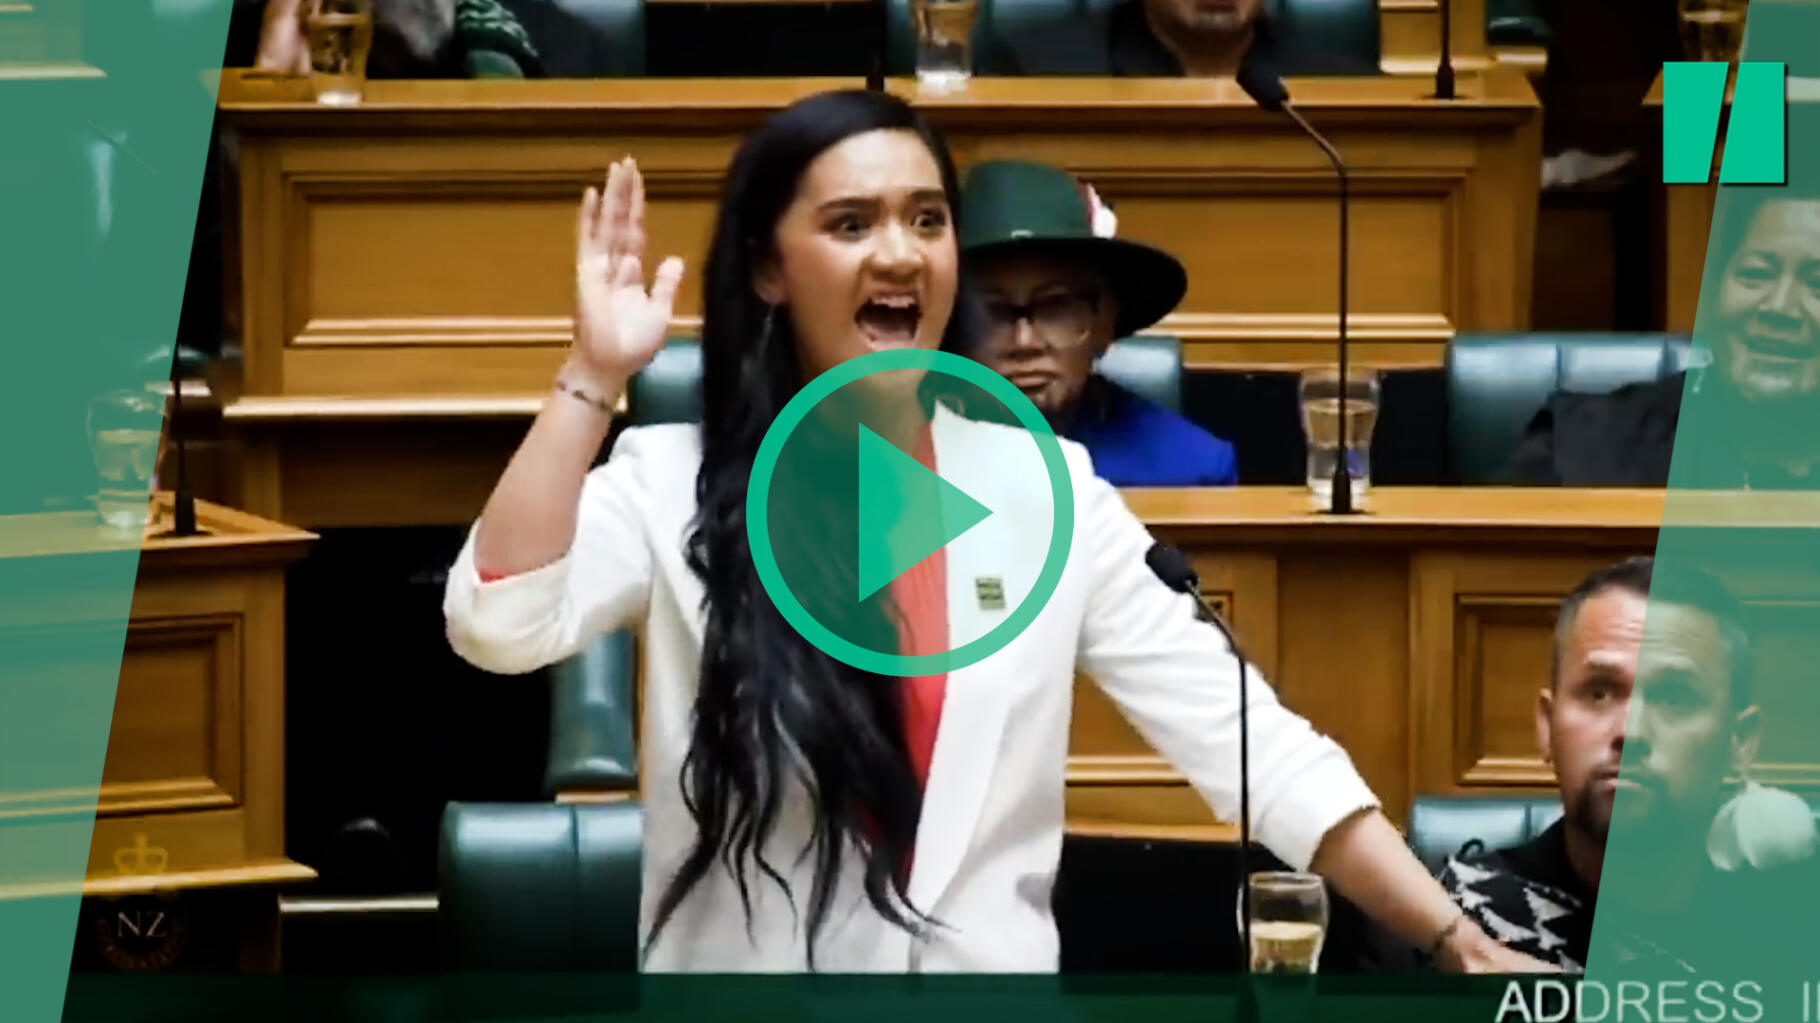 Maeby Clarke, New Zealand's youngest elected official, stuns Parliament with her fiery maiden speech